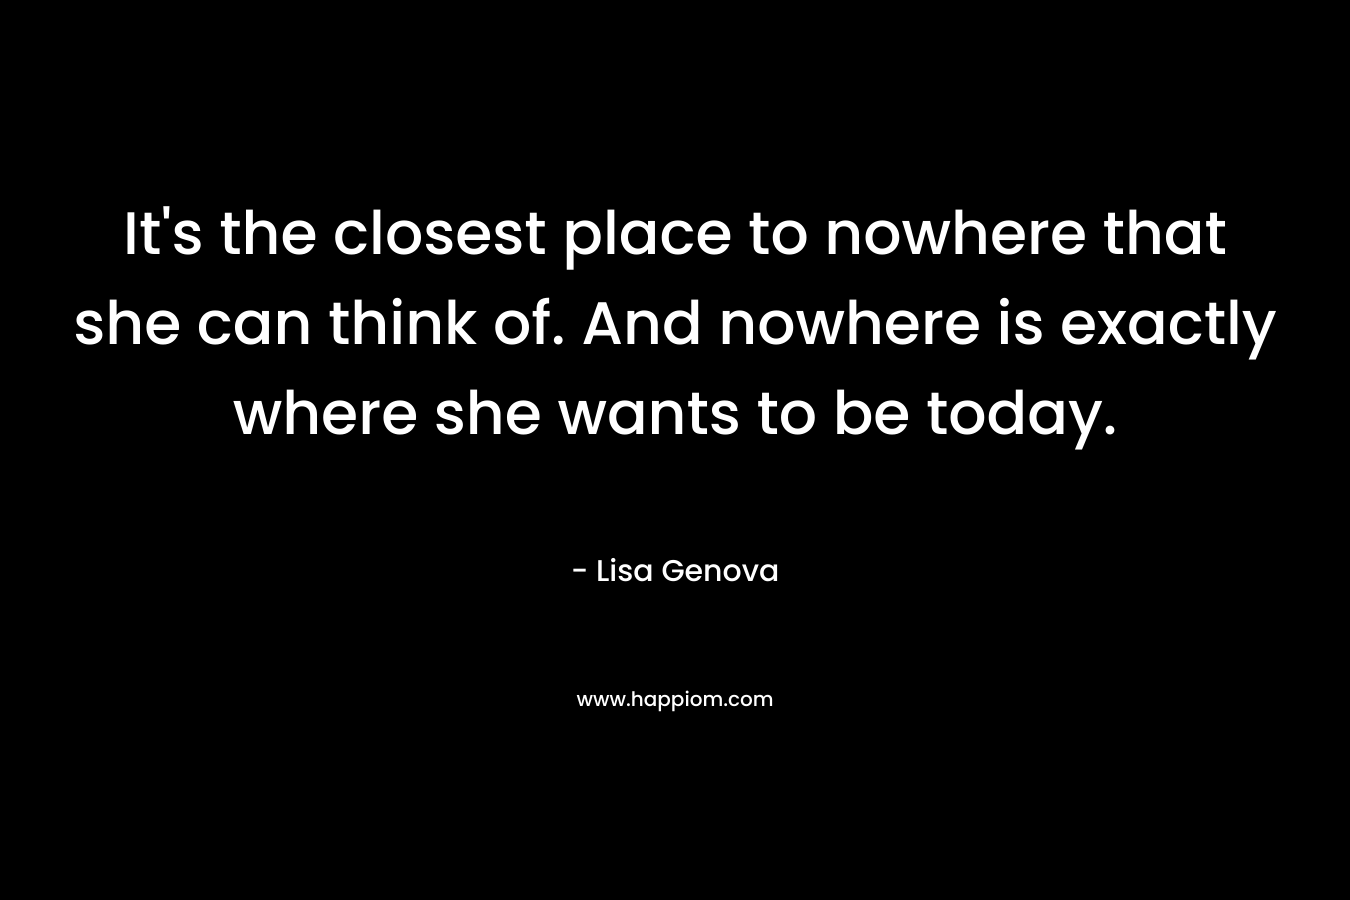 It's the closest place to nowhere that she can think of. And nowhere is exactly where she wants to be today.